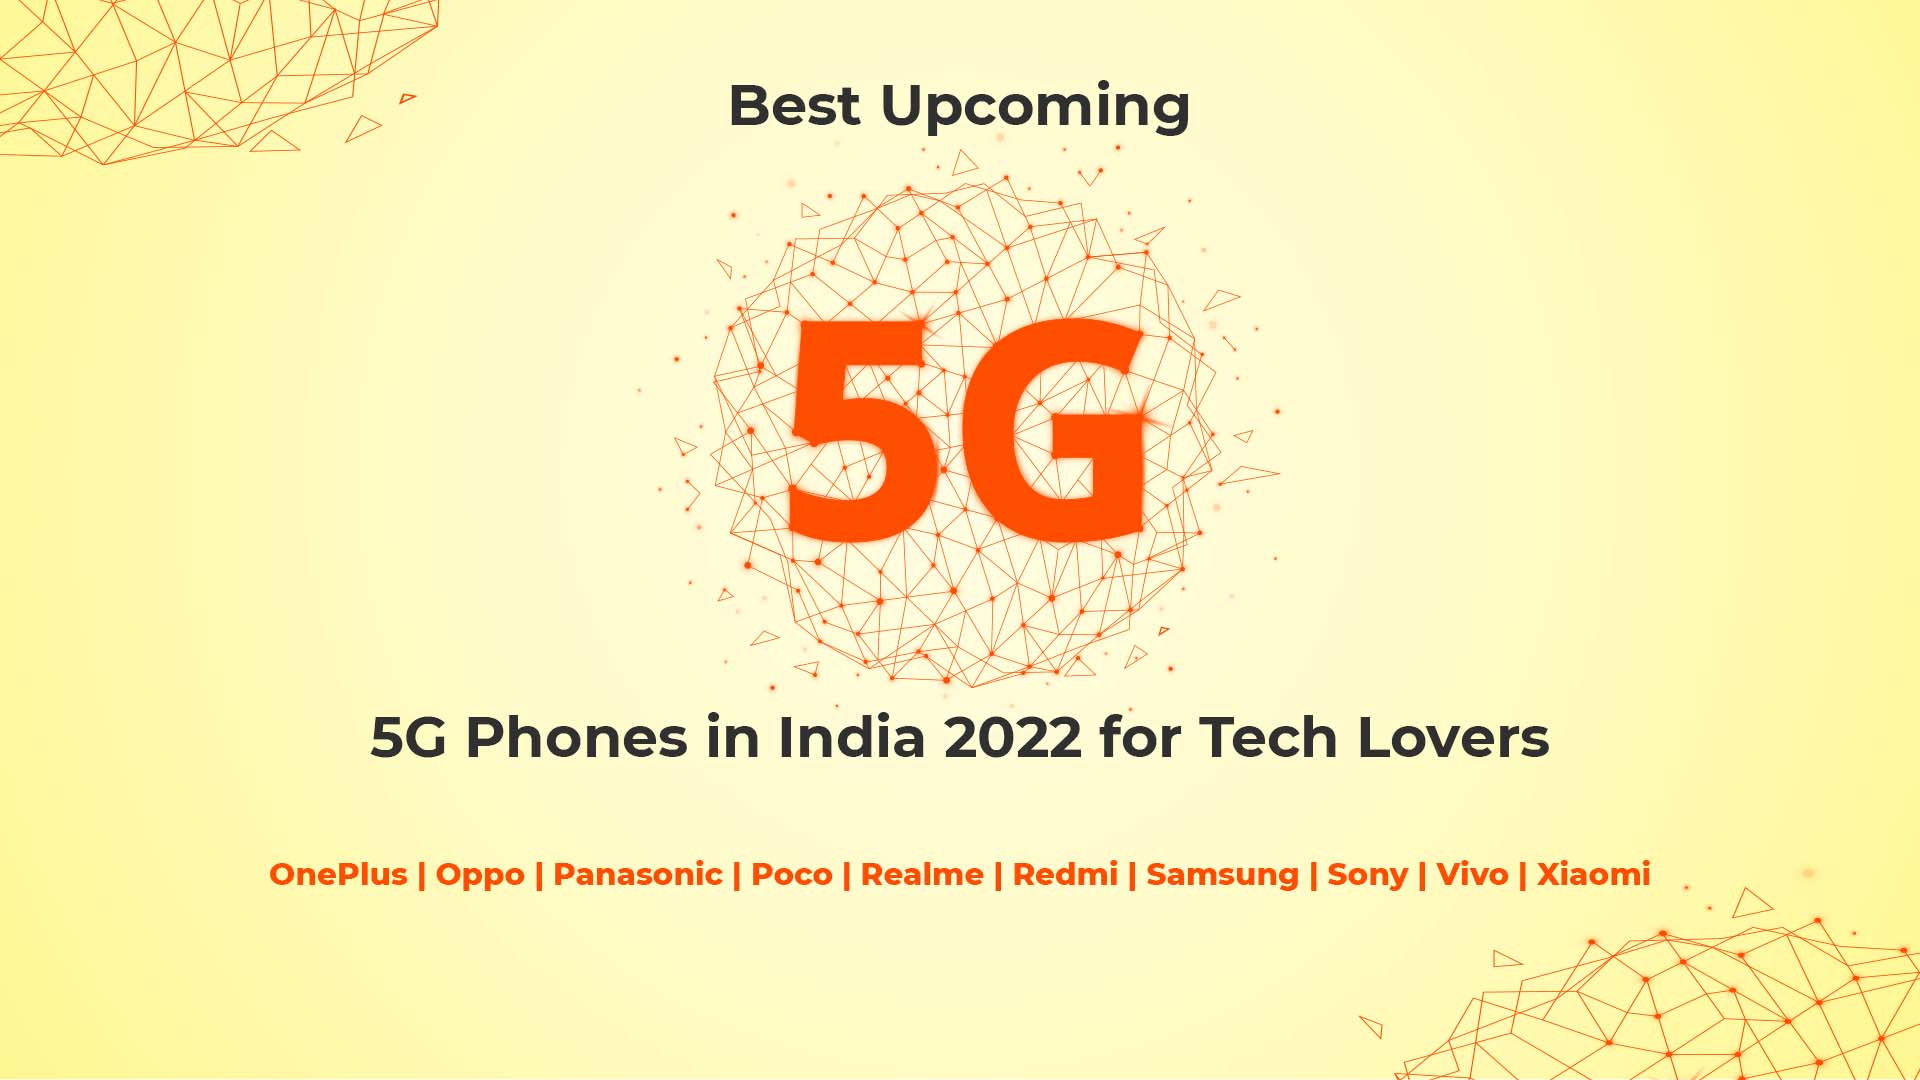 Best Upcoming 5g Phones in India 2022 to Tech Lovers